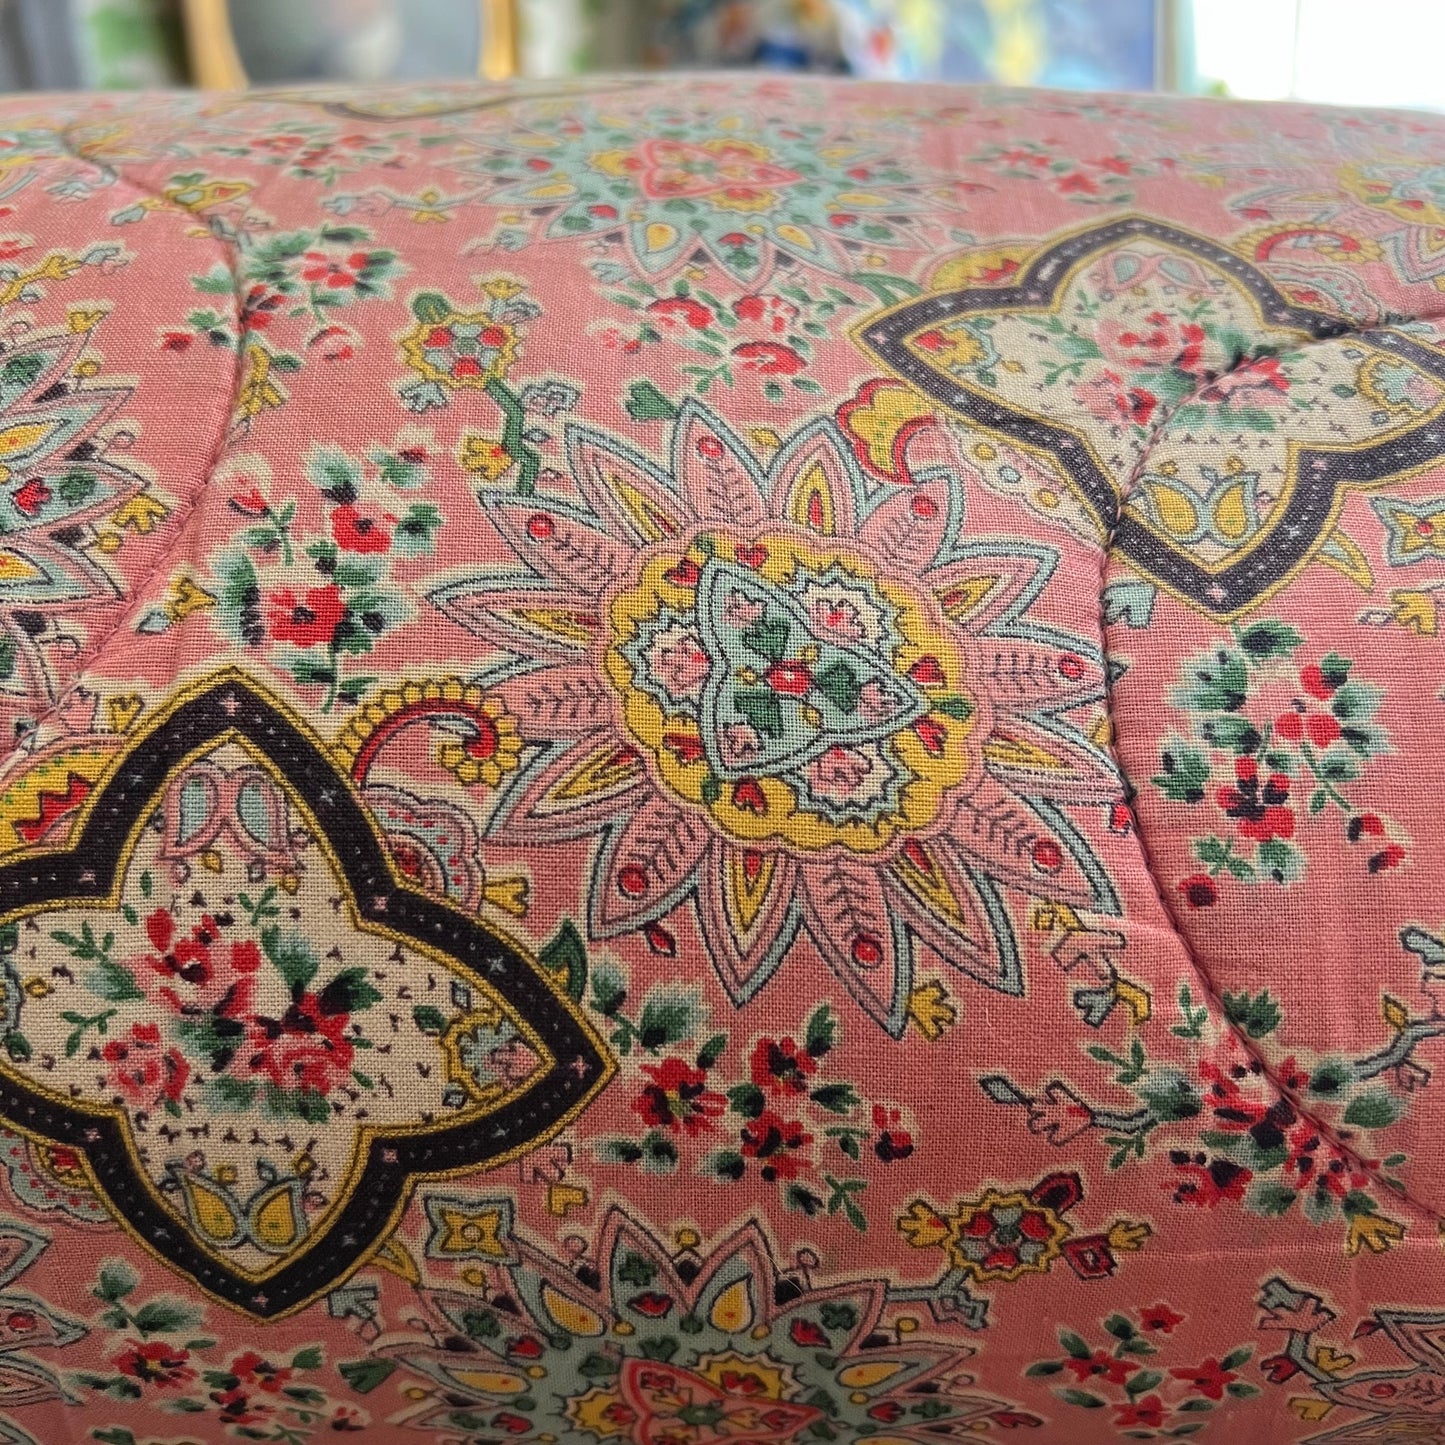 Vintage Cotton Paisley 'Winter Dream' Wool Fill Eiderdown Bed Topper